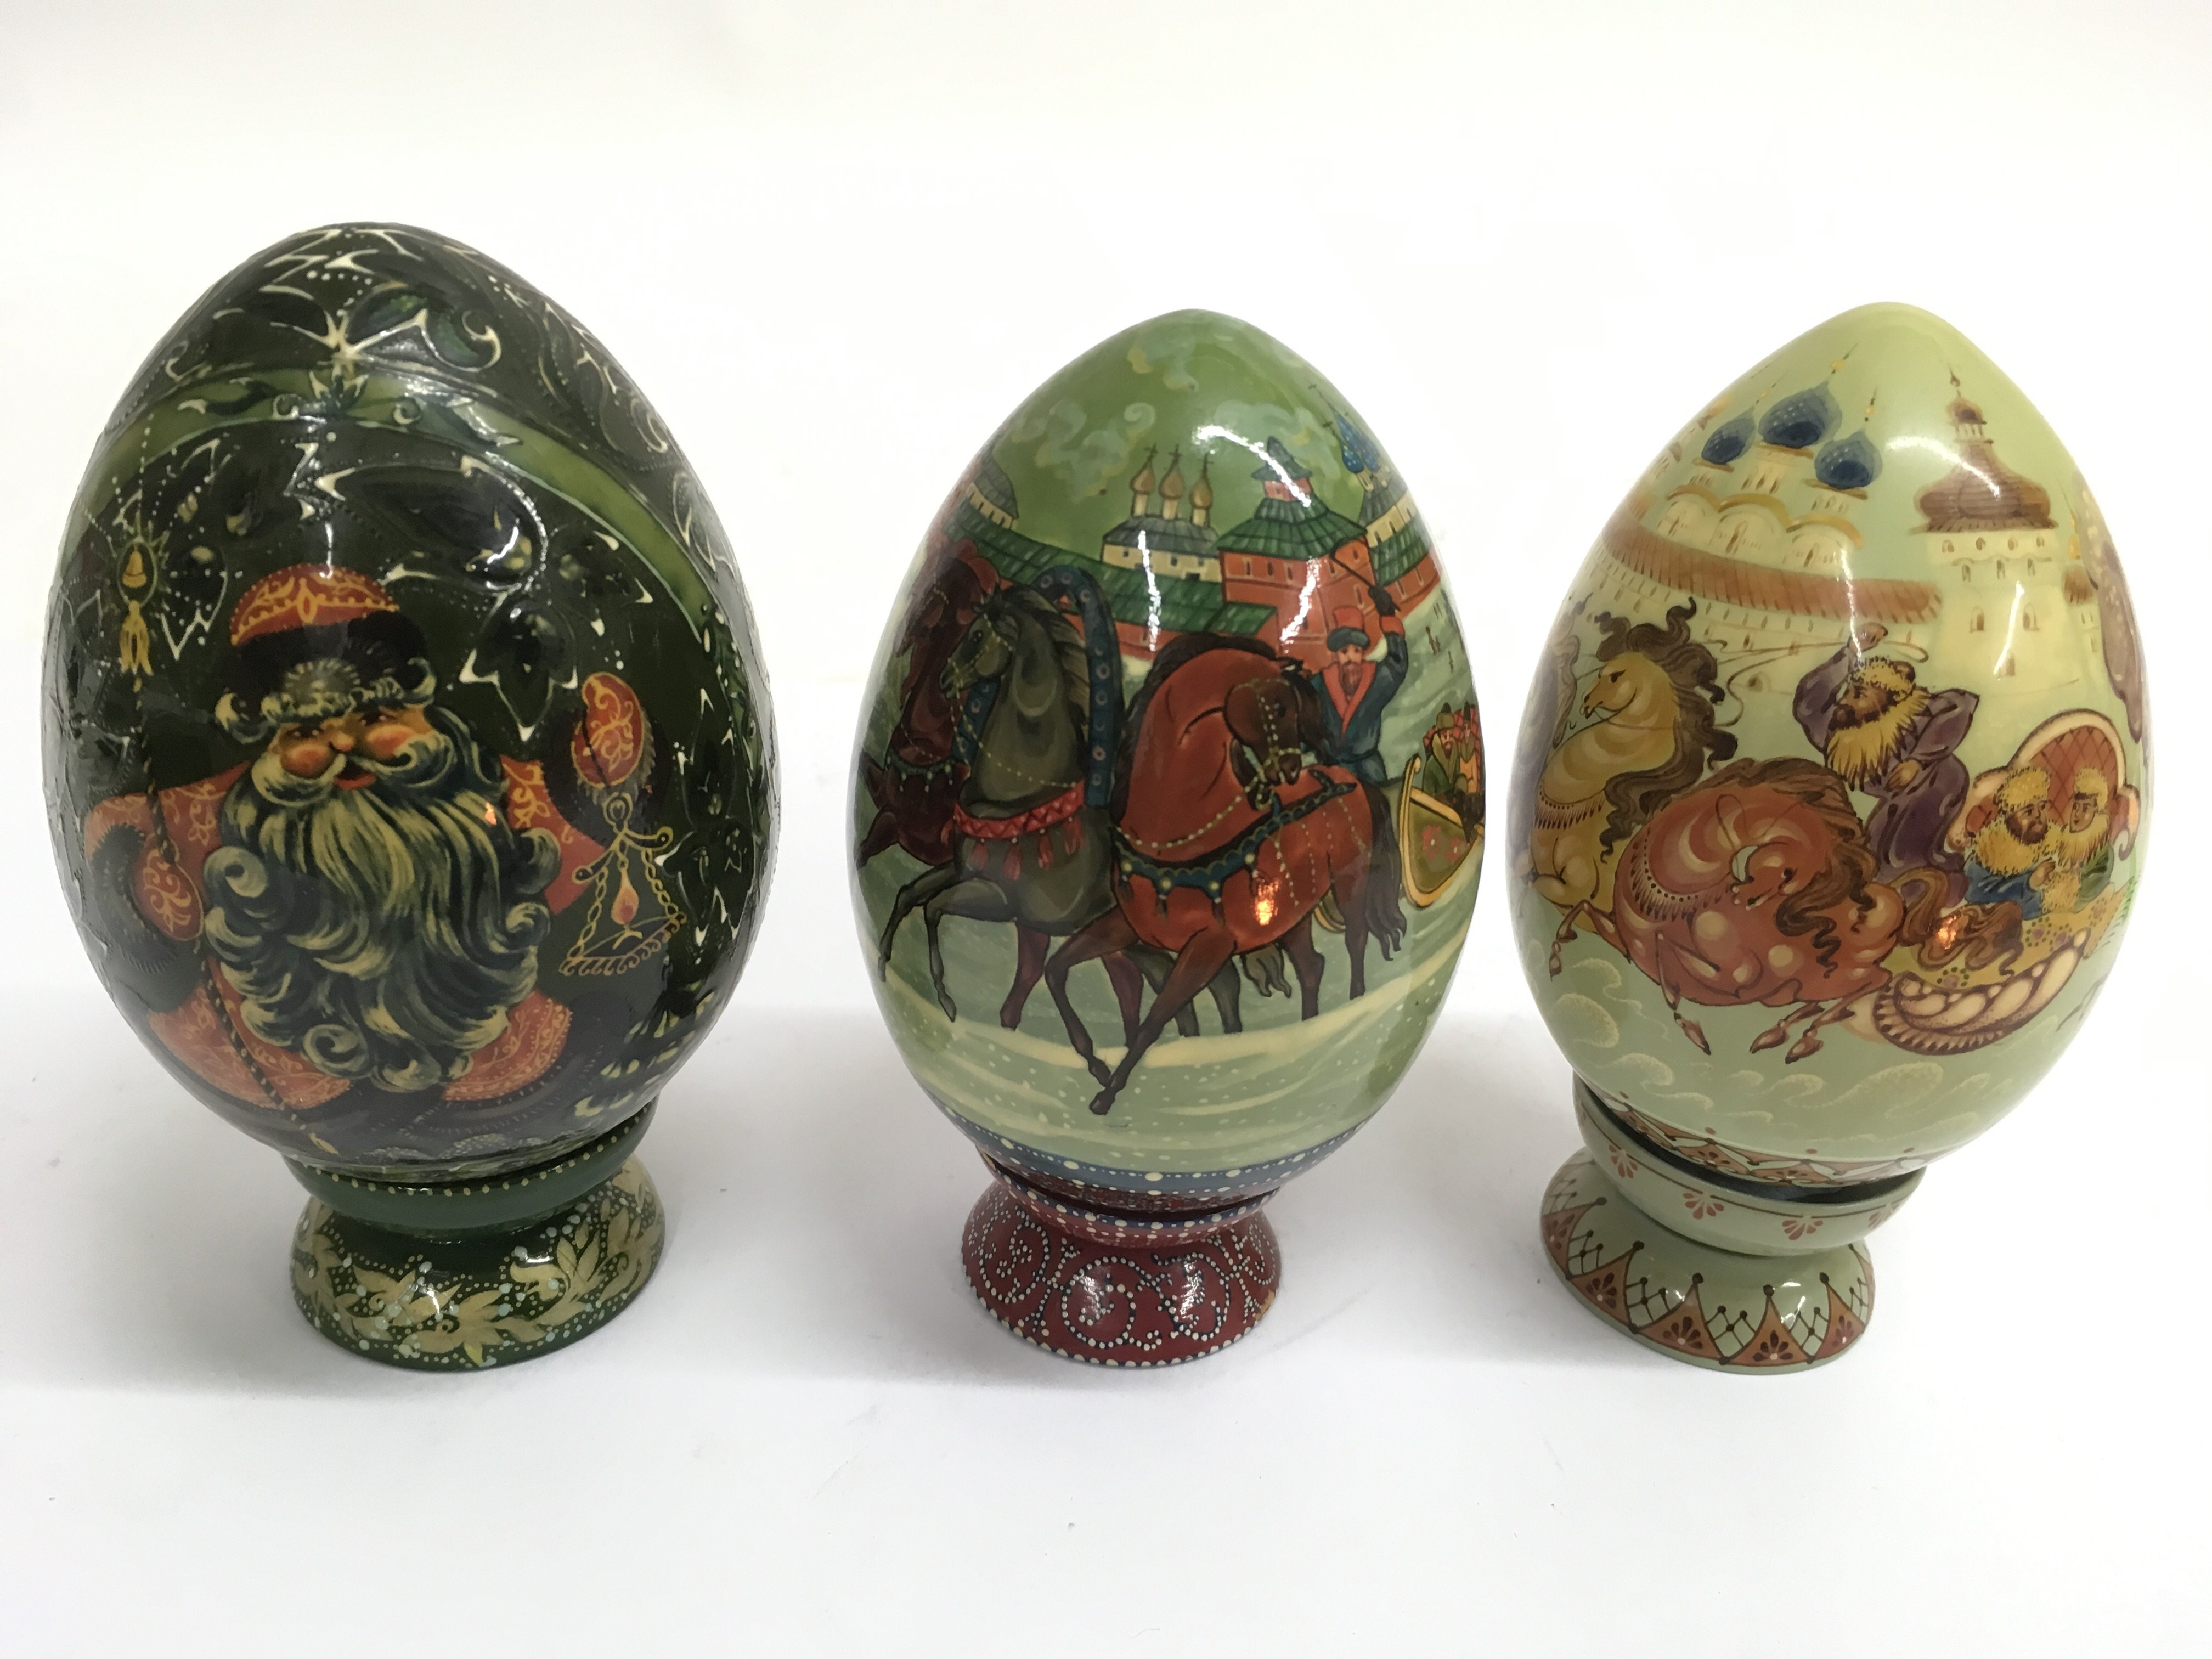 Three finely painted wooden Easter eggs, two paint